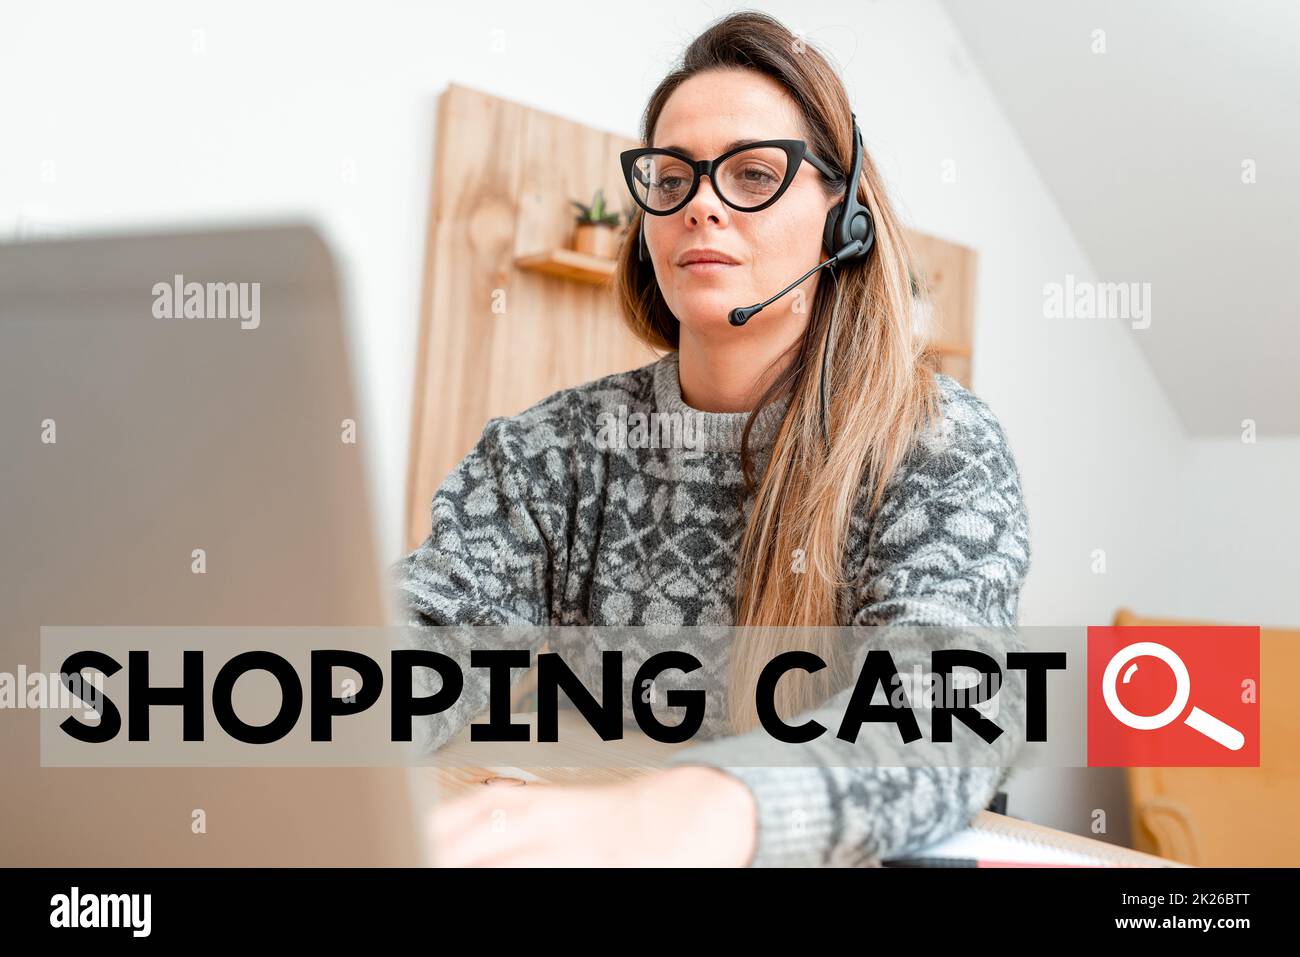 Handwriting text Shopping Cart. Conceptual photo Case Trolley Carrying Groceries and Merchandise Abstract Writing New Blog Content, Reading Online Articles And News Stock Photo